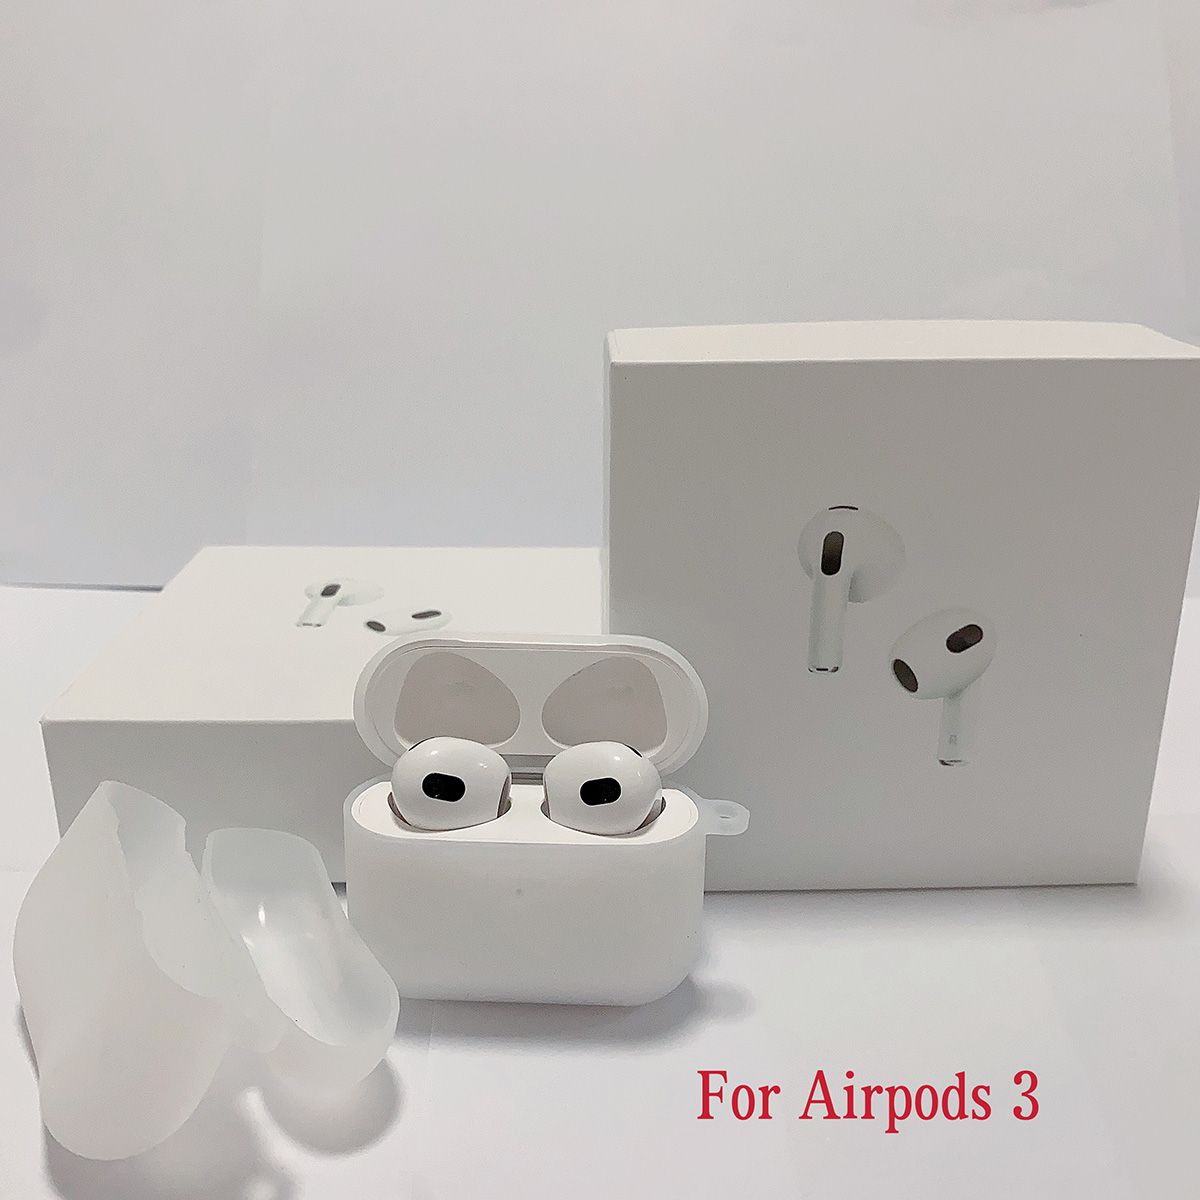 For Airpods 3